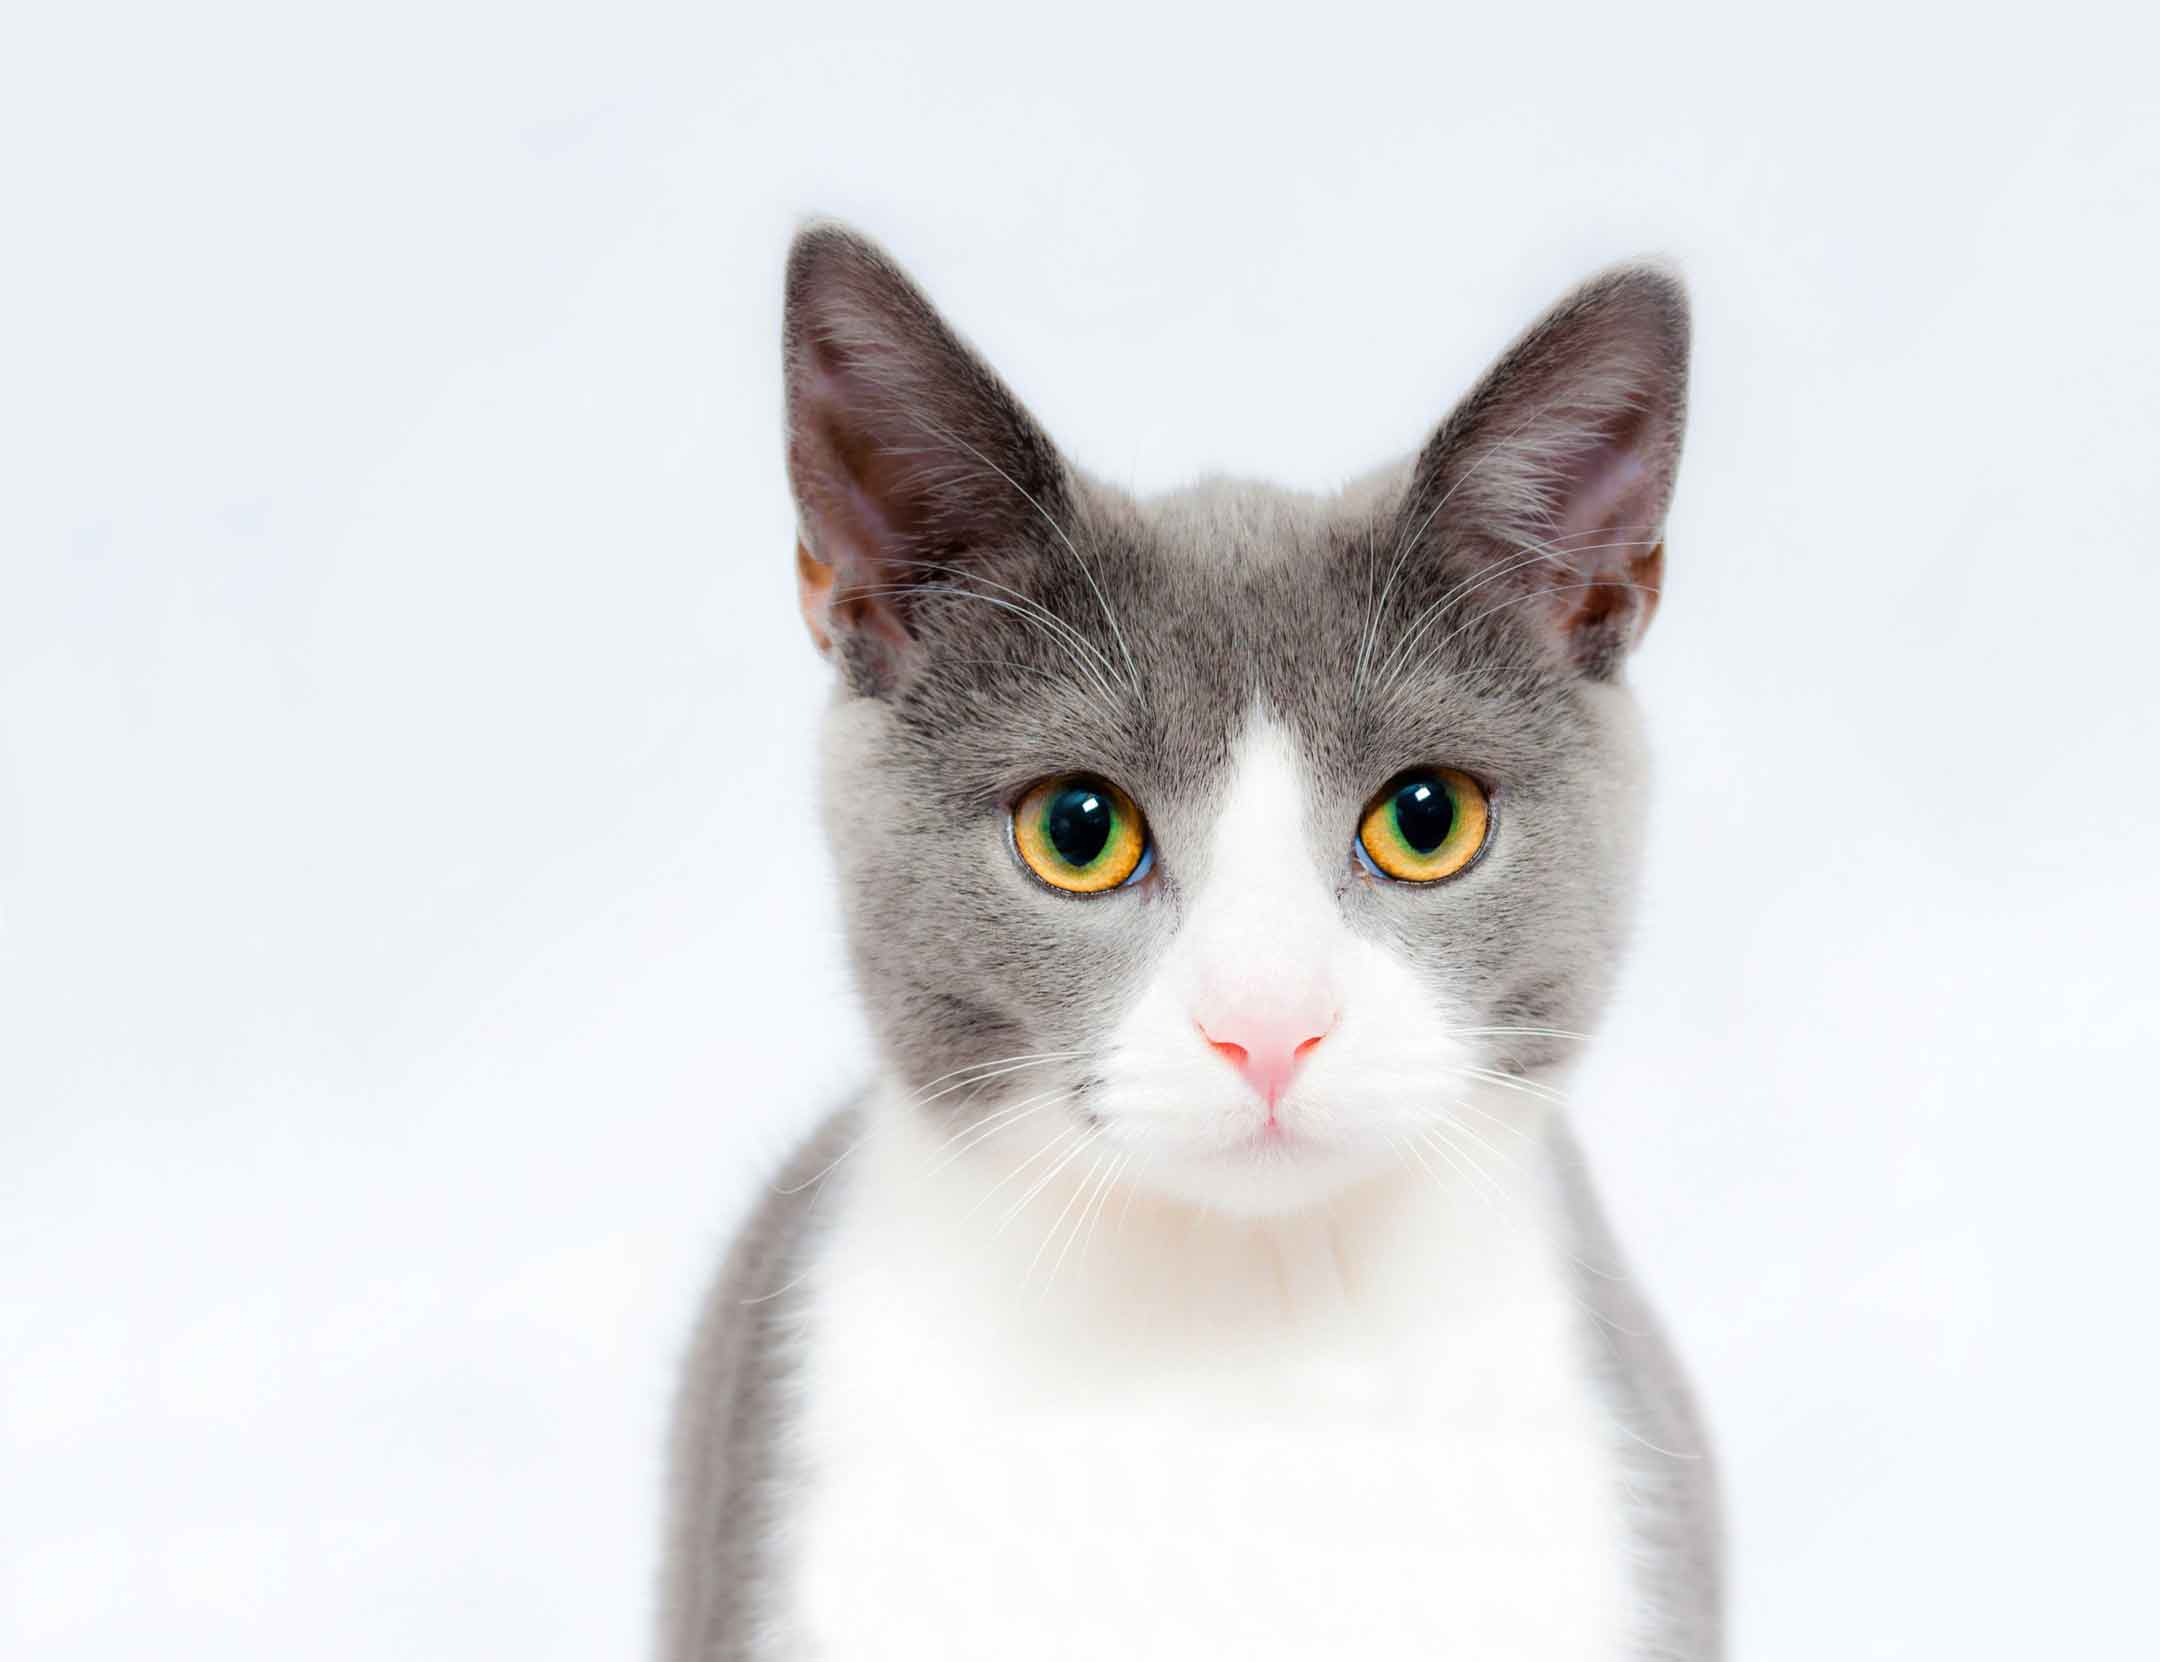 Professionally lit portrait of a gray and white cat with yellow eyes